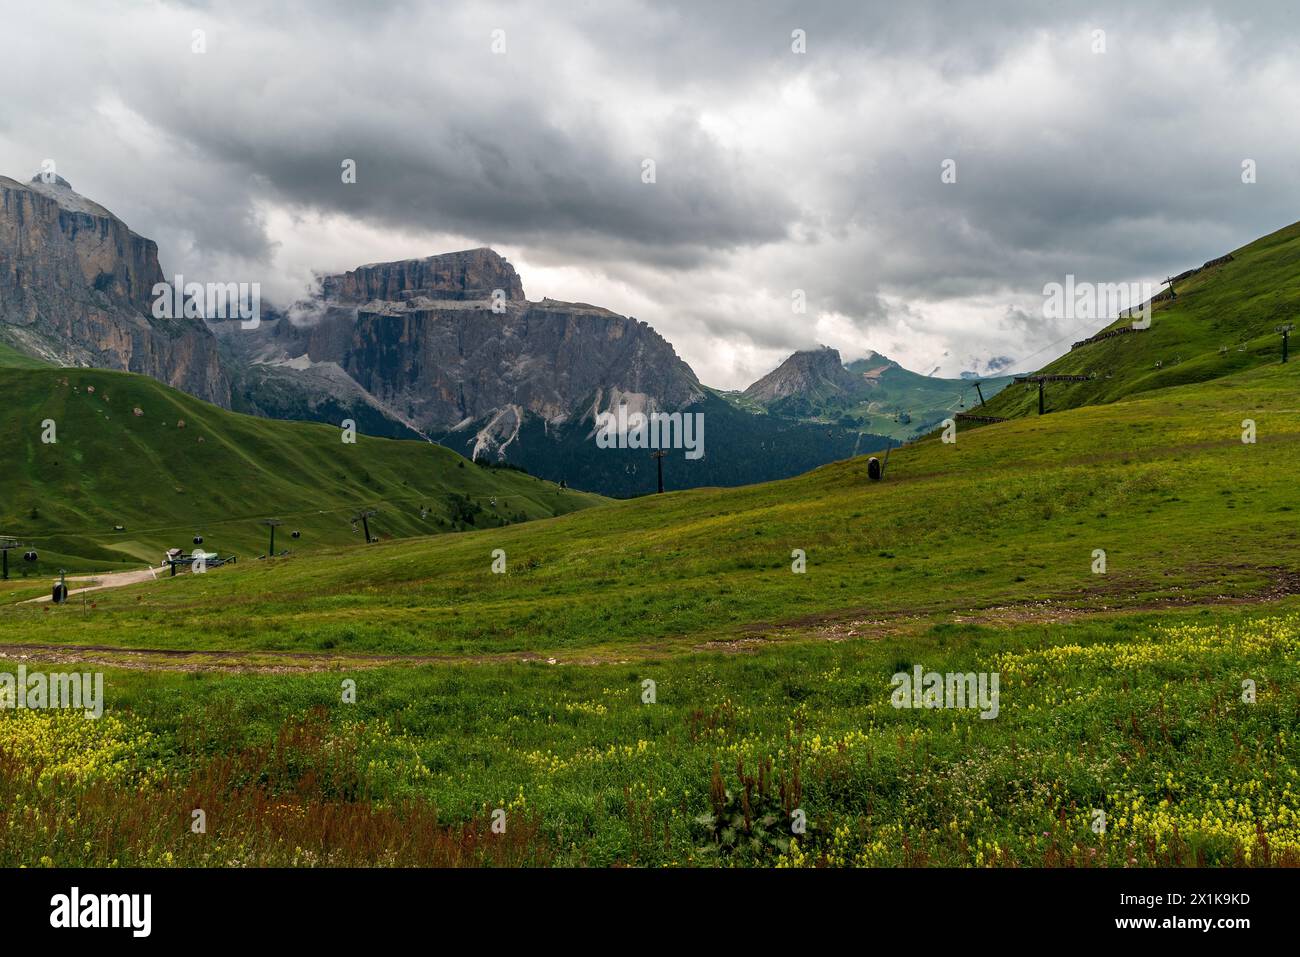 Dolomites mountains in Italy - Sella mountain ridge from meadows above Sella pass during cloudy summer day Stock Photo